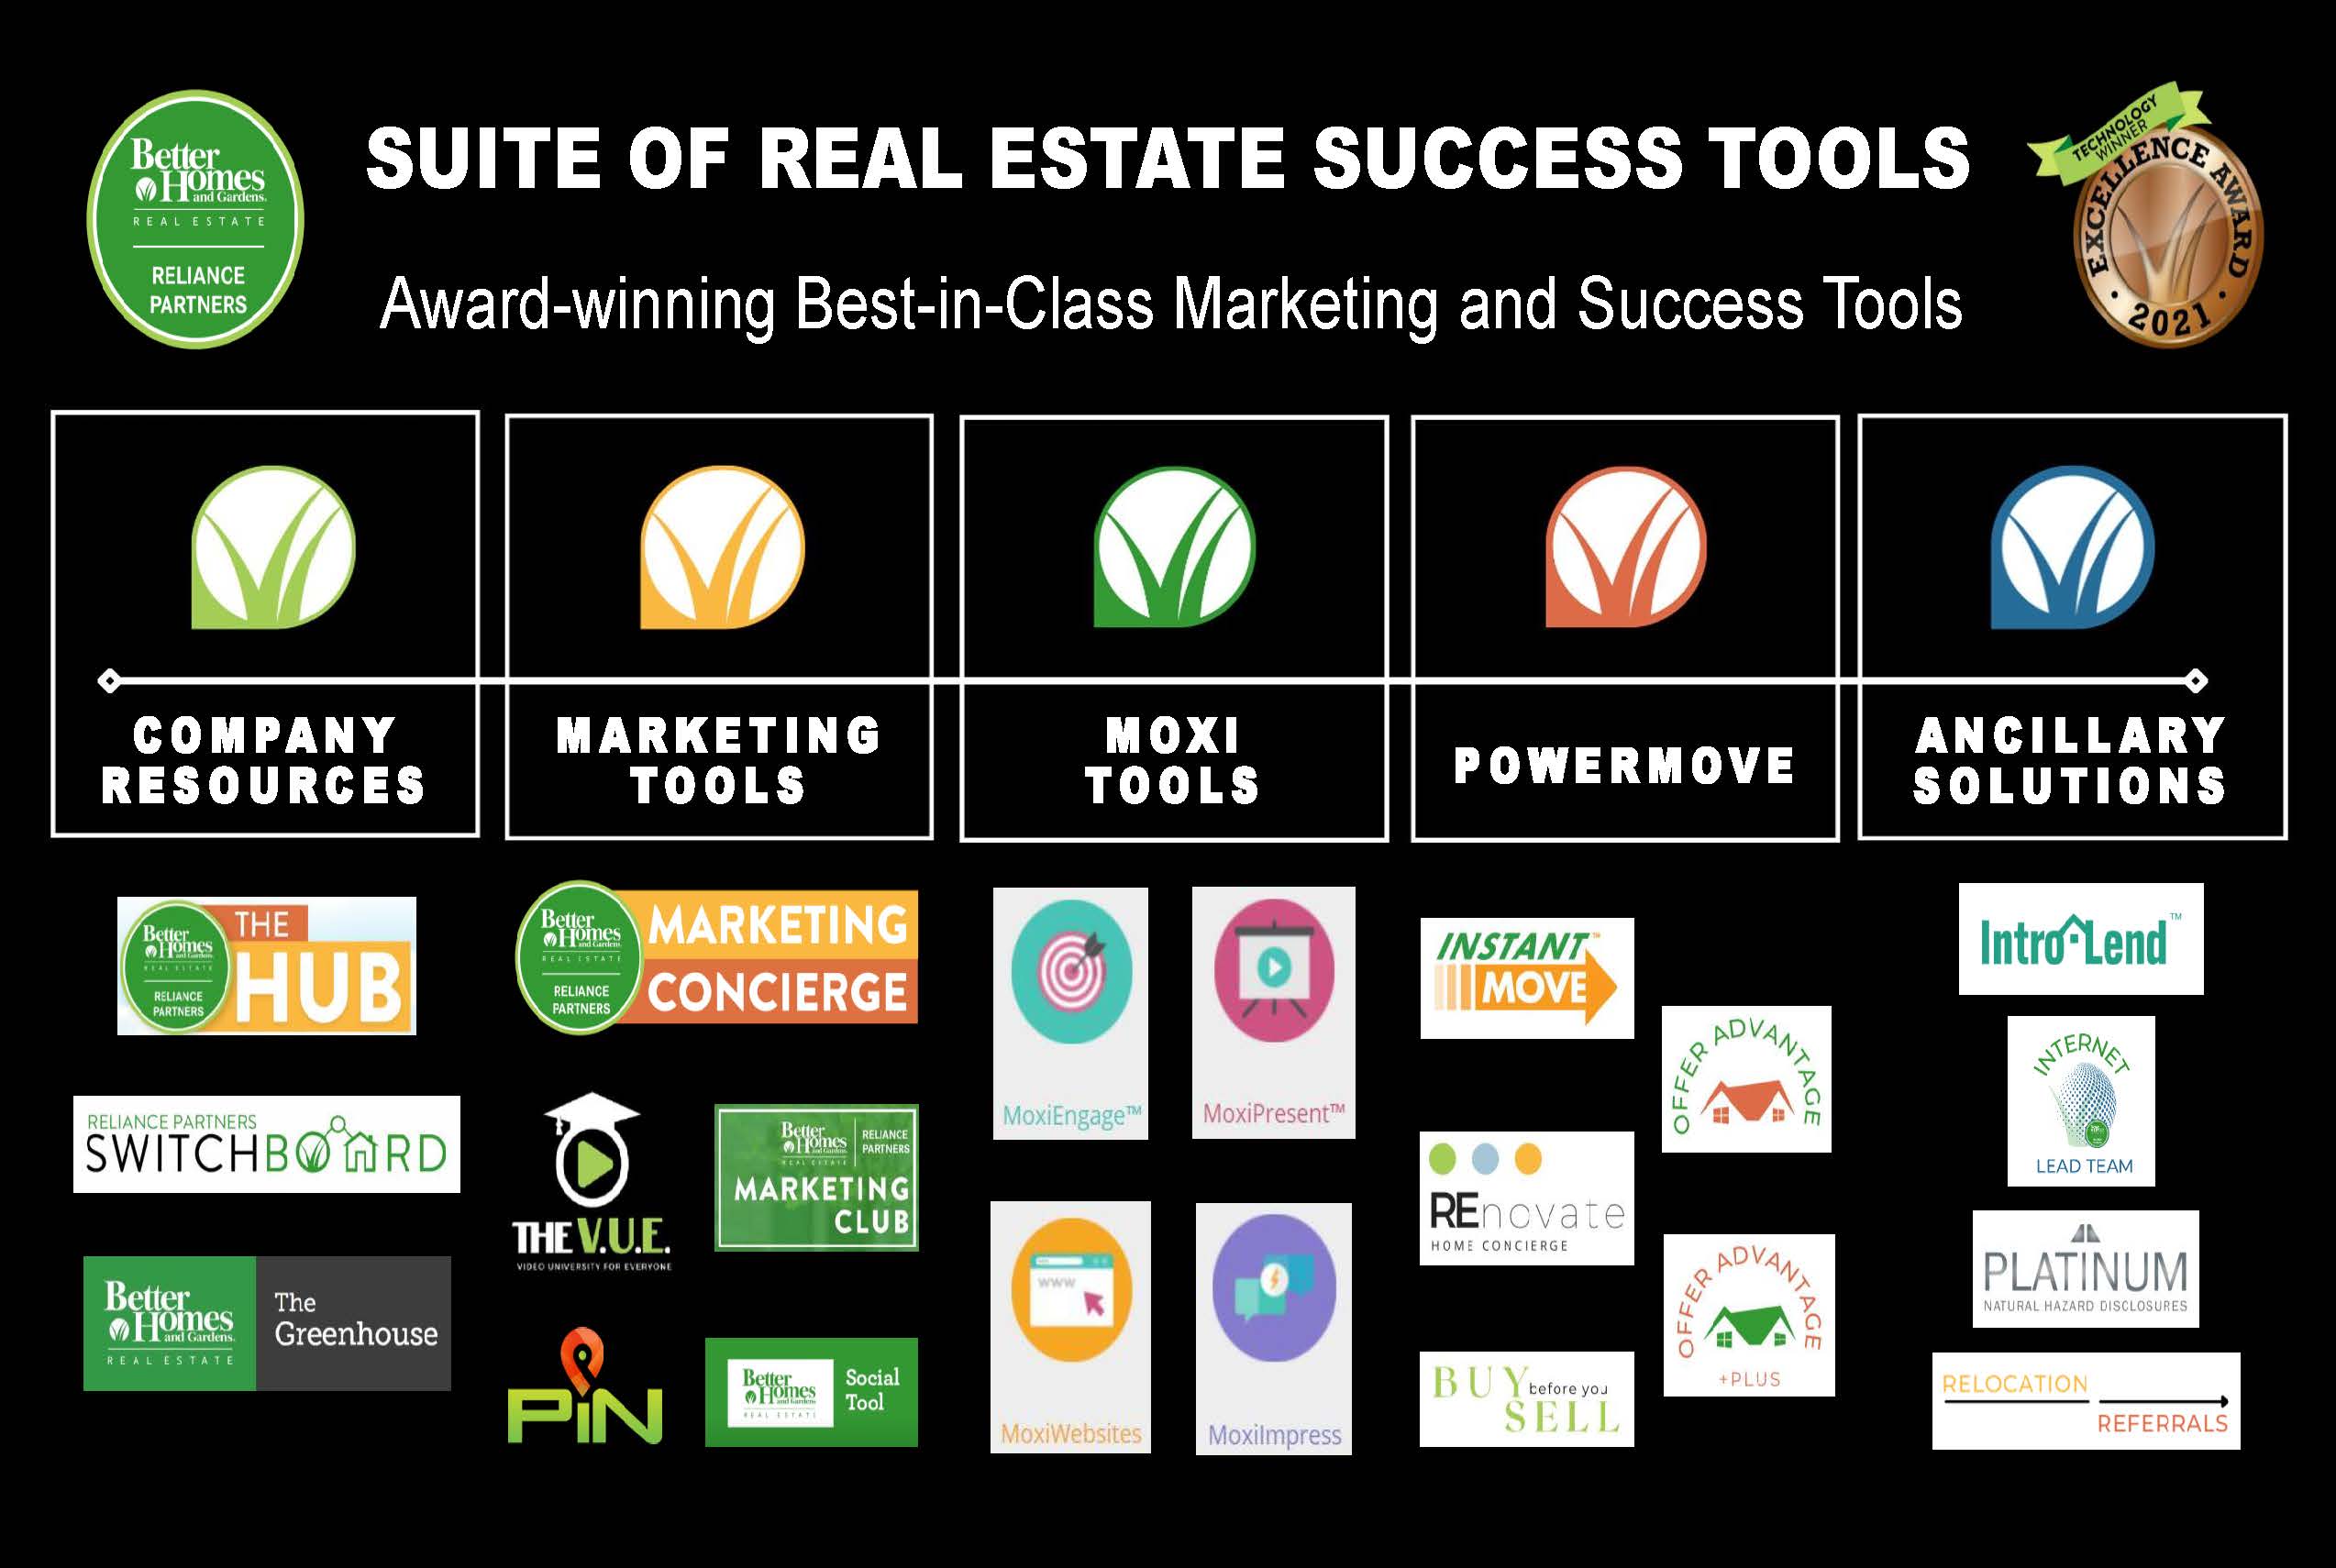 BHGRE Reliance Partners Suite of Tools graphic printable